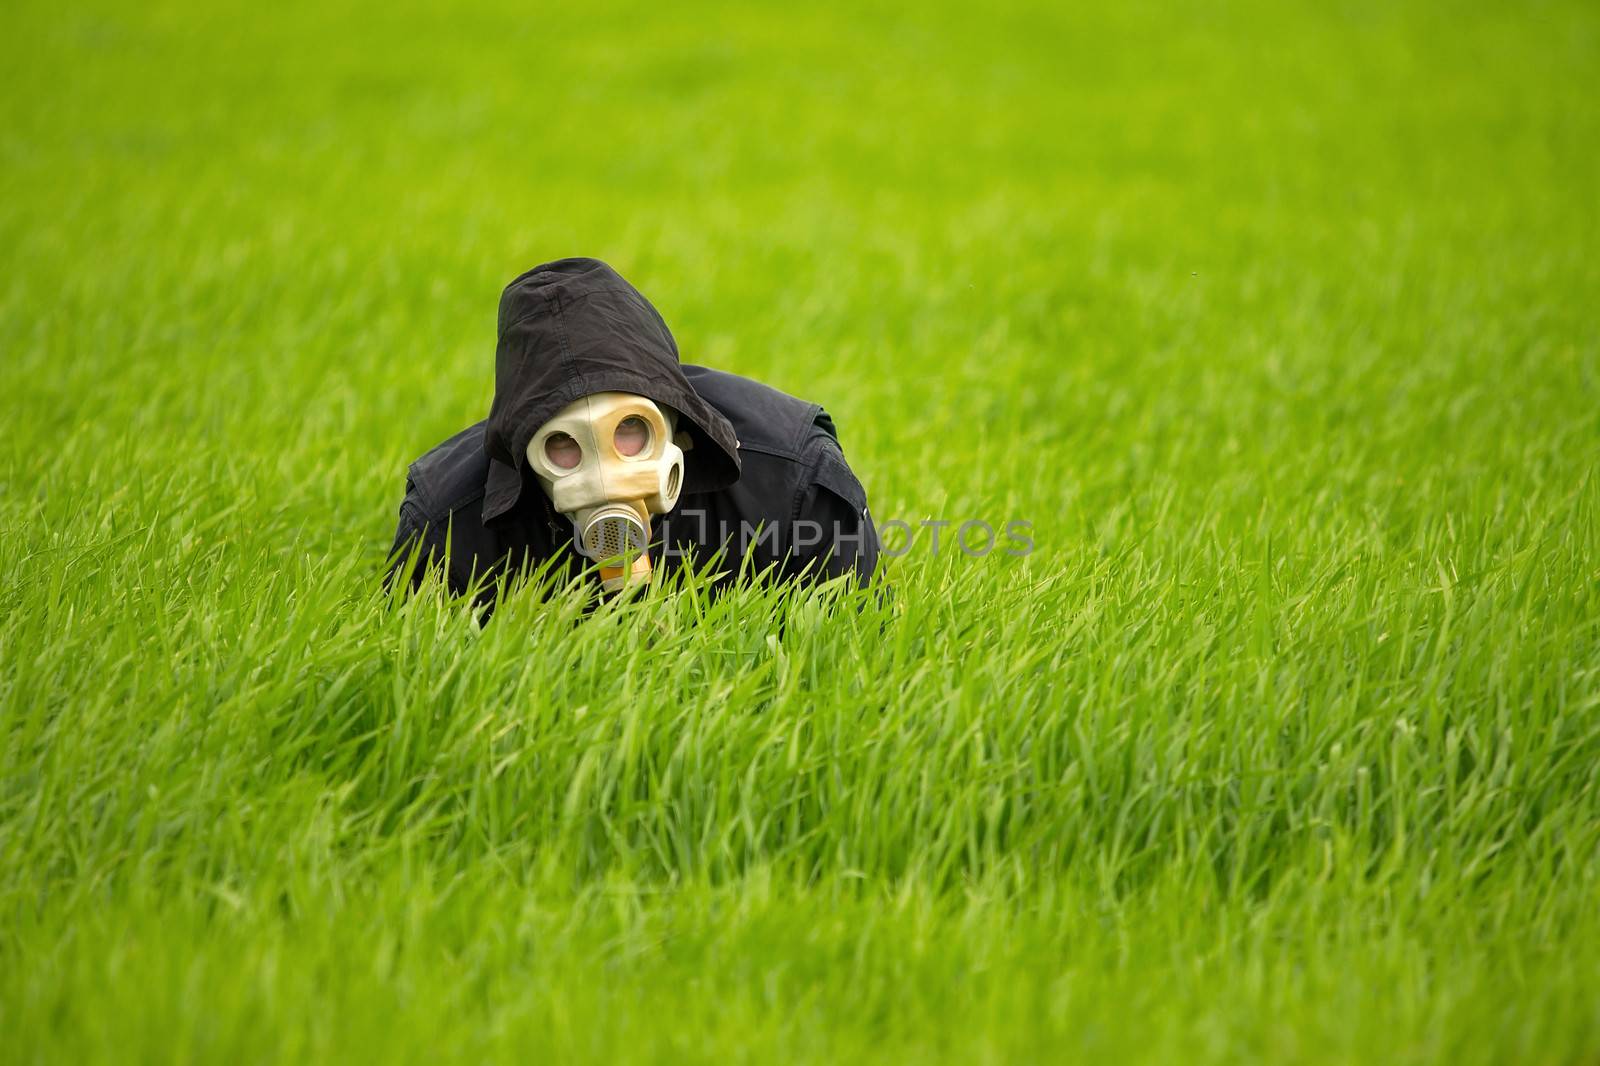 Allergic man in gas mask in the grass